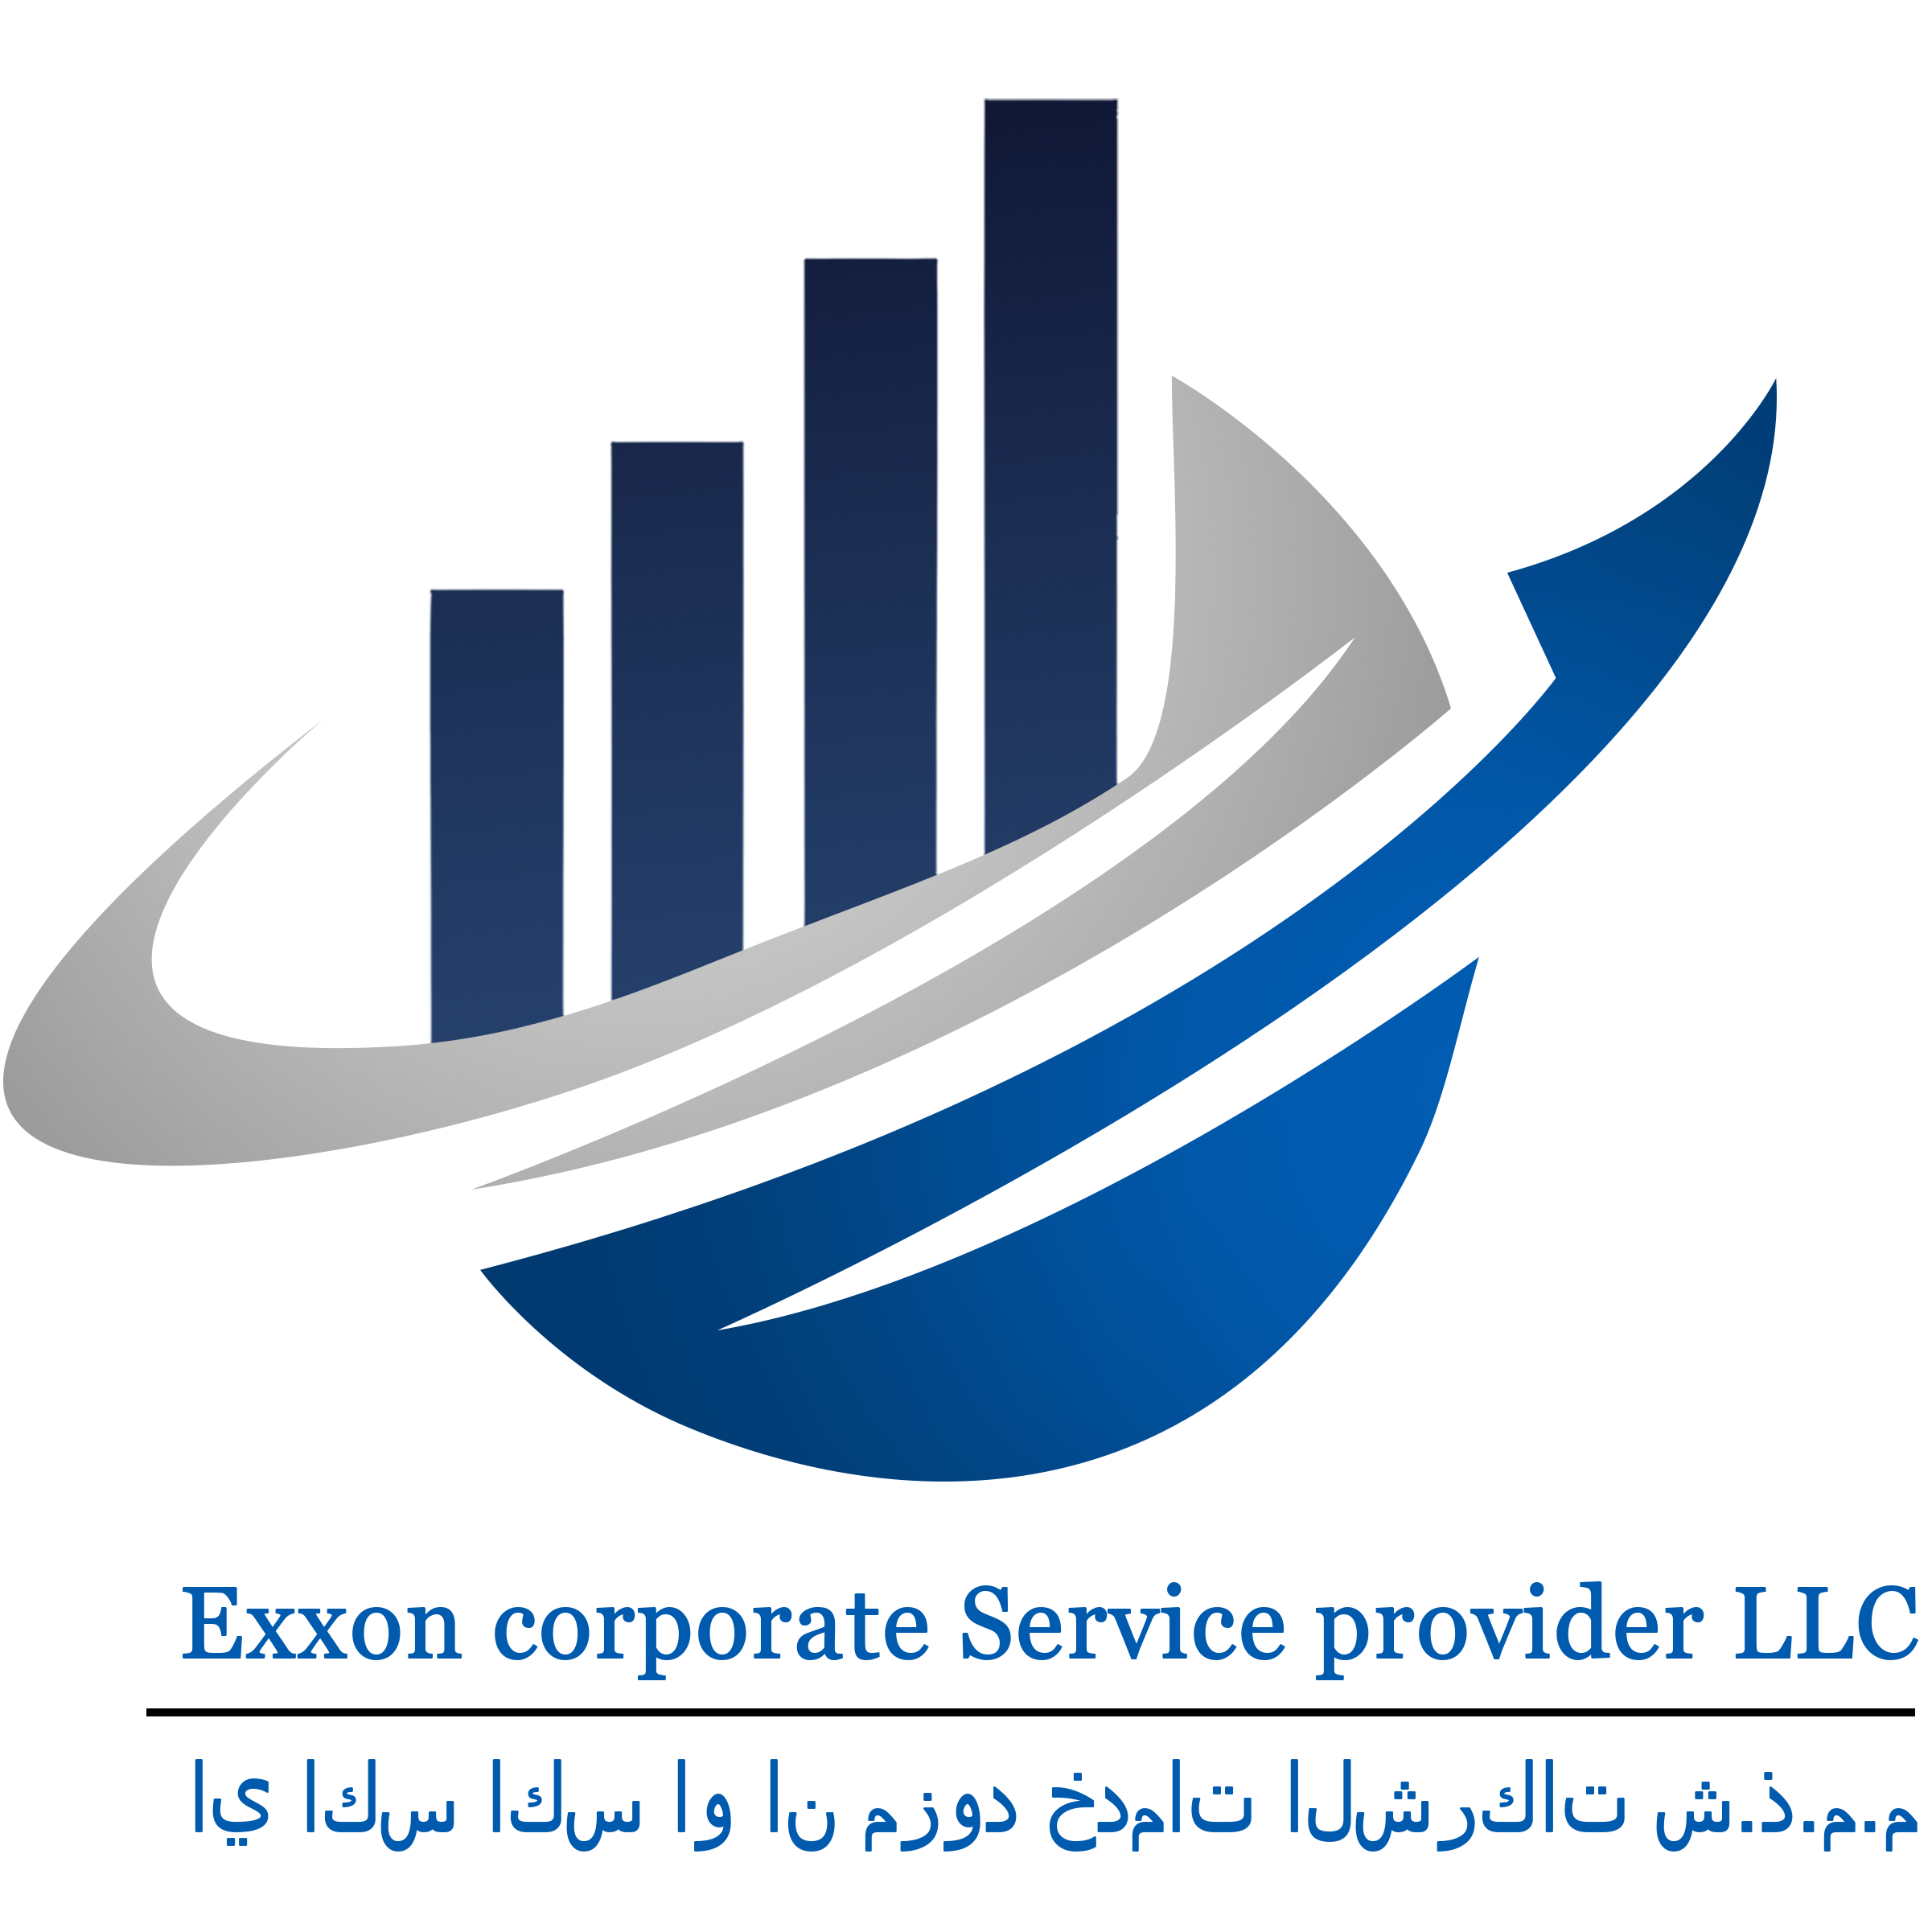 Top Business Setup Consultants in Dubai UAE | Business Setup Company Formation in Dubai | Exxon Business Setup in Dubai & the UAE | Top Business Setup Service Providers in Dubai, UAE | Dubai’s Business Setup Experts We Make It Fast & Simple | List Of business setup companies In Dubai UAE | Exxon Business Service Provide In Dubai UAE | Exxon